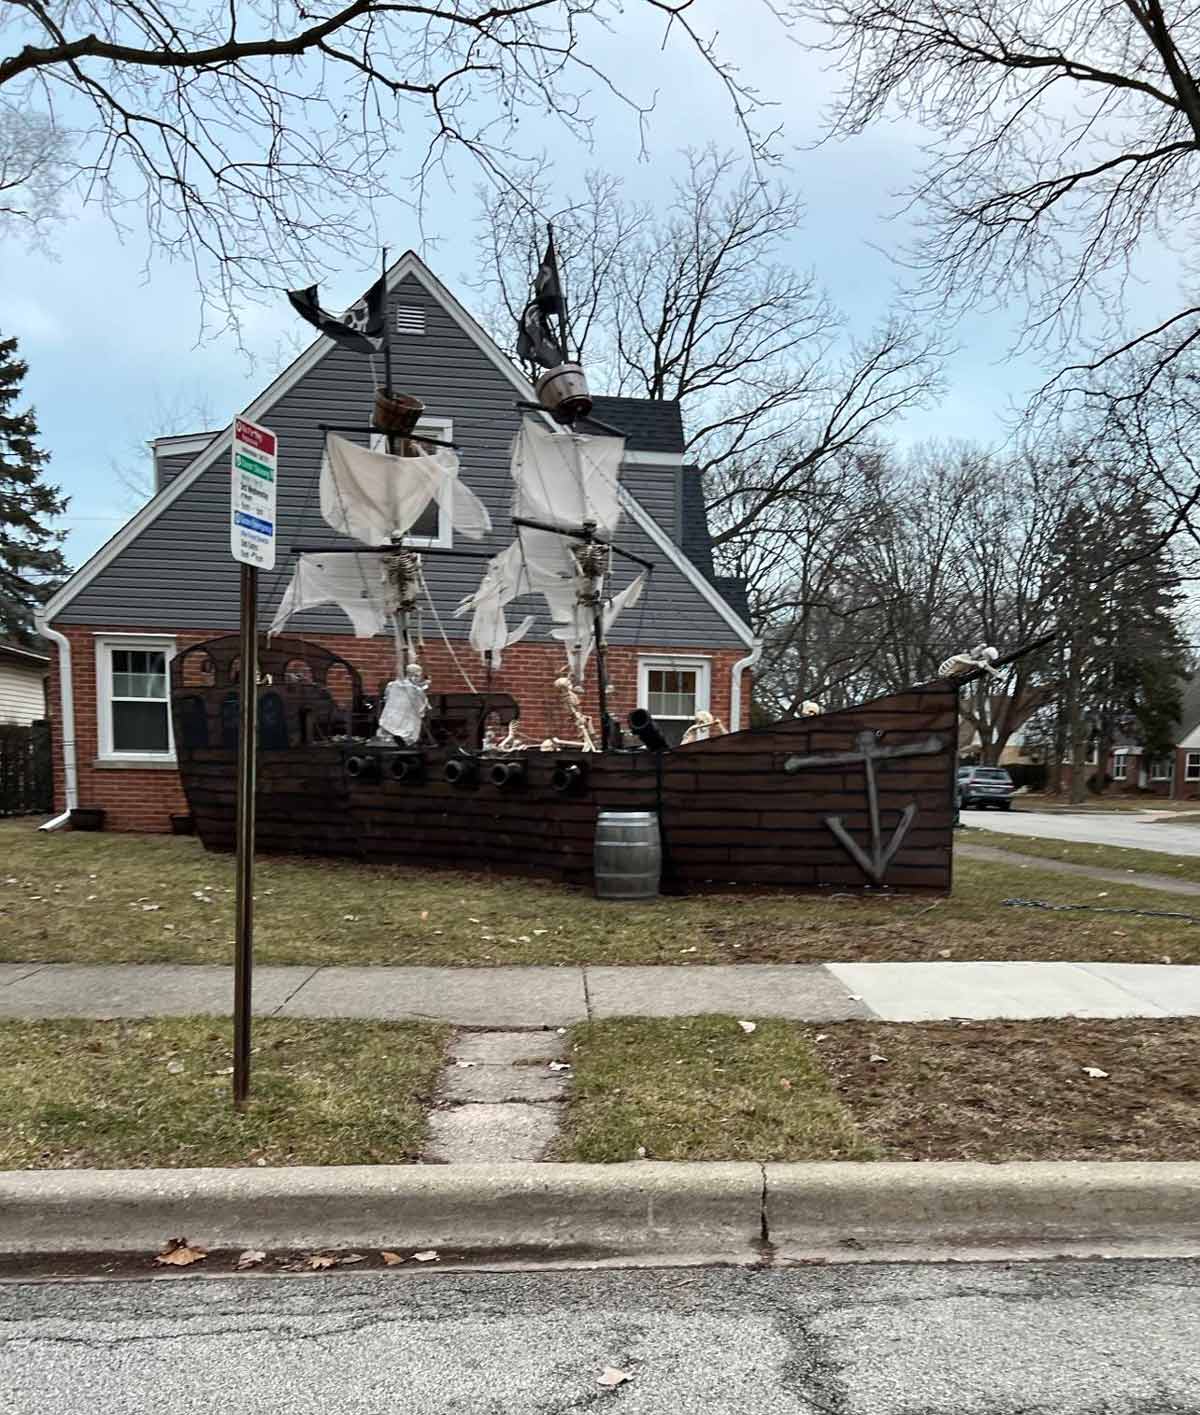 My neighbors have a pirate ship in their front yard